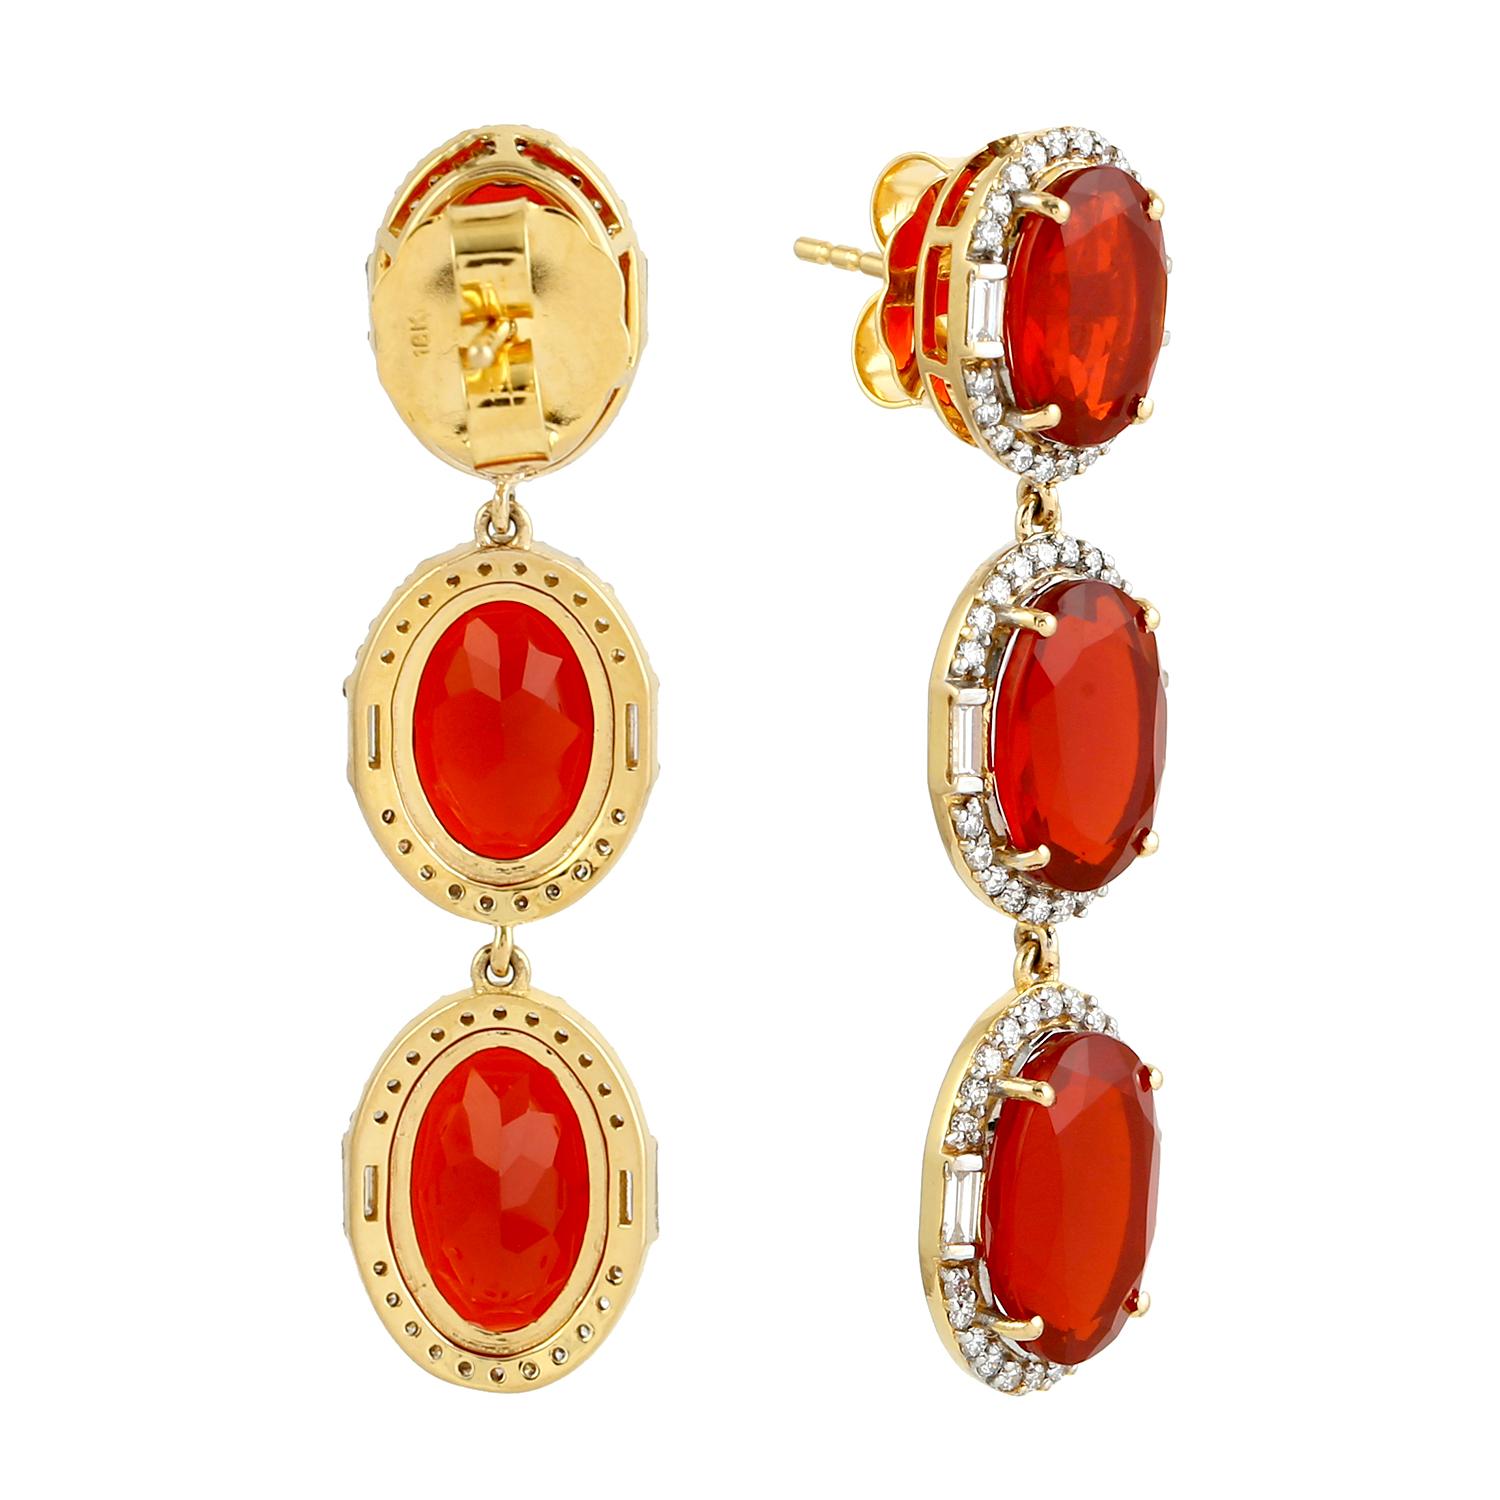 Art Deco Three Tier Fire Opal Earrings With Diamonds Made In 18k Yellow Gold For Sale